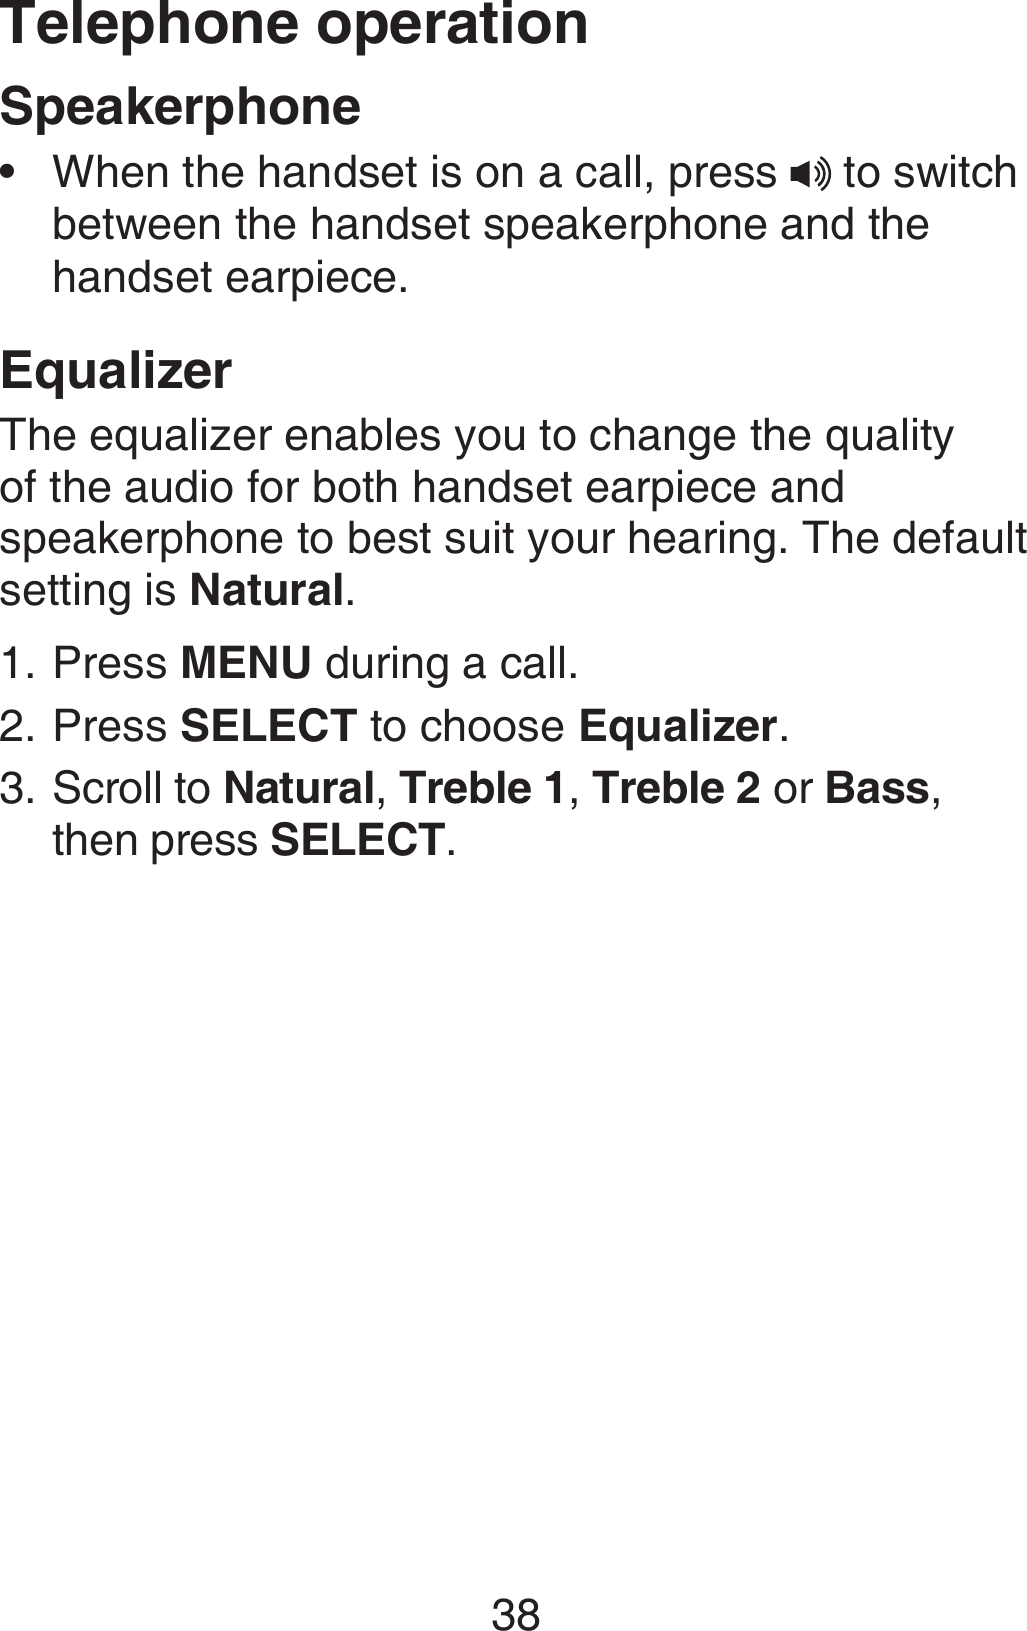 Telephone operation38SpeakerphoneWhen the handset is on a call, press  to switch between the handset speakerphone and the handset earpiece.EqualizerThe equalizer enables you to change the quality of the audio for both handset earpiece and speakerphone to best suit your hearing. The default setting is Natural.Press MENU during a call.Press SELECT to choose Equalizer.Scroll to Natural, Treble 1, Treble 2 or Bass, then press SELECT.•1.2.3.